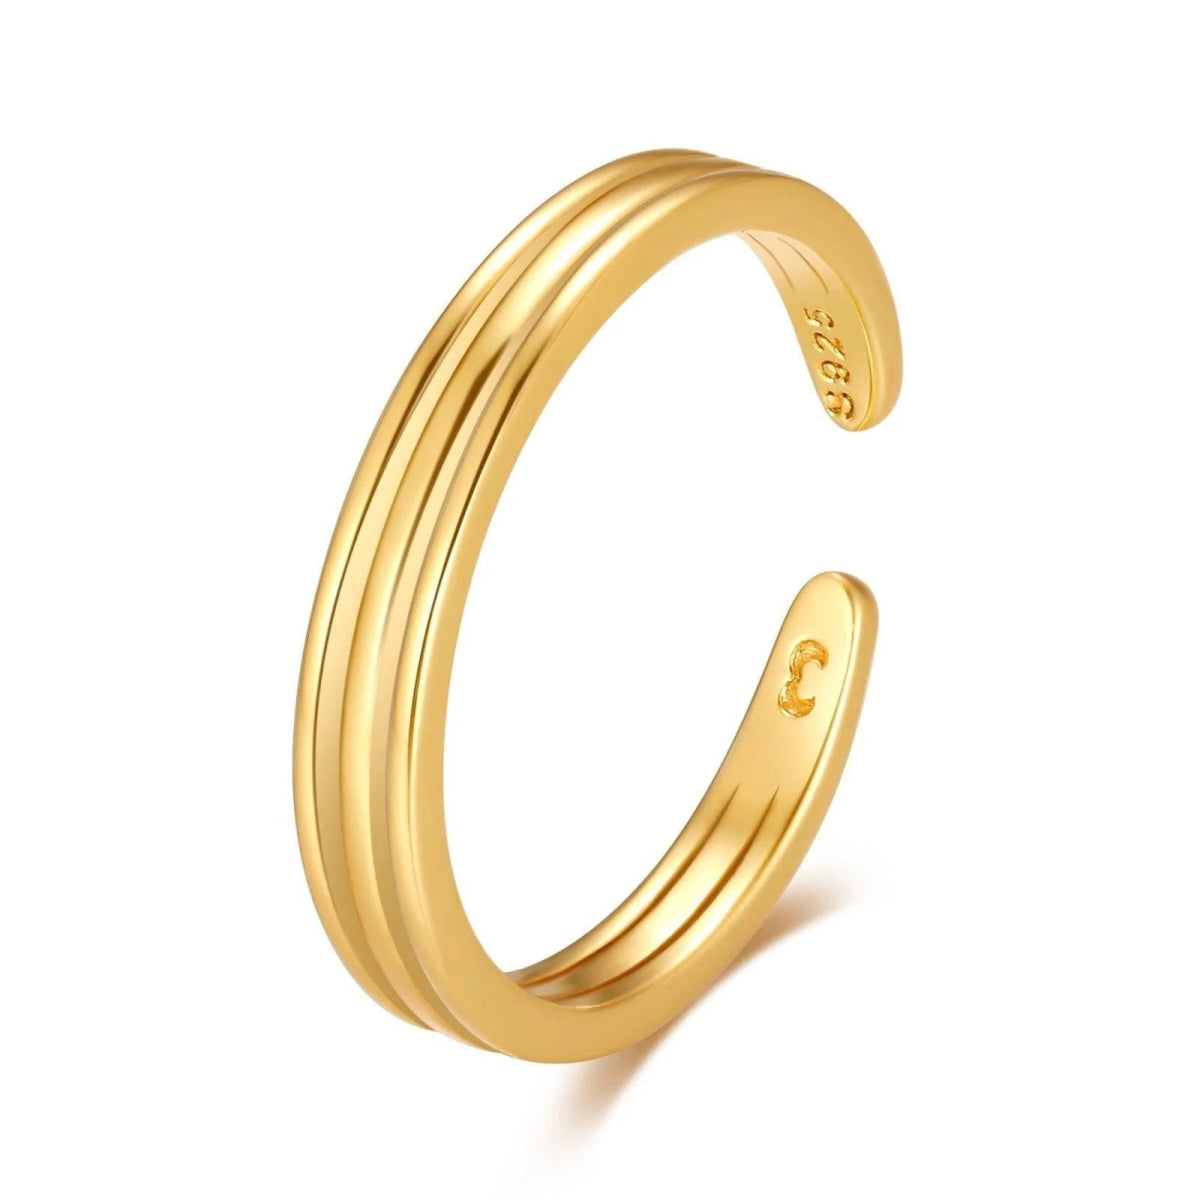 "Trace" Foot Ring - Milas Jewels Shop